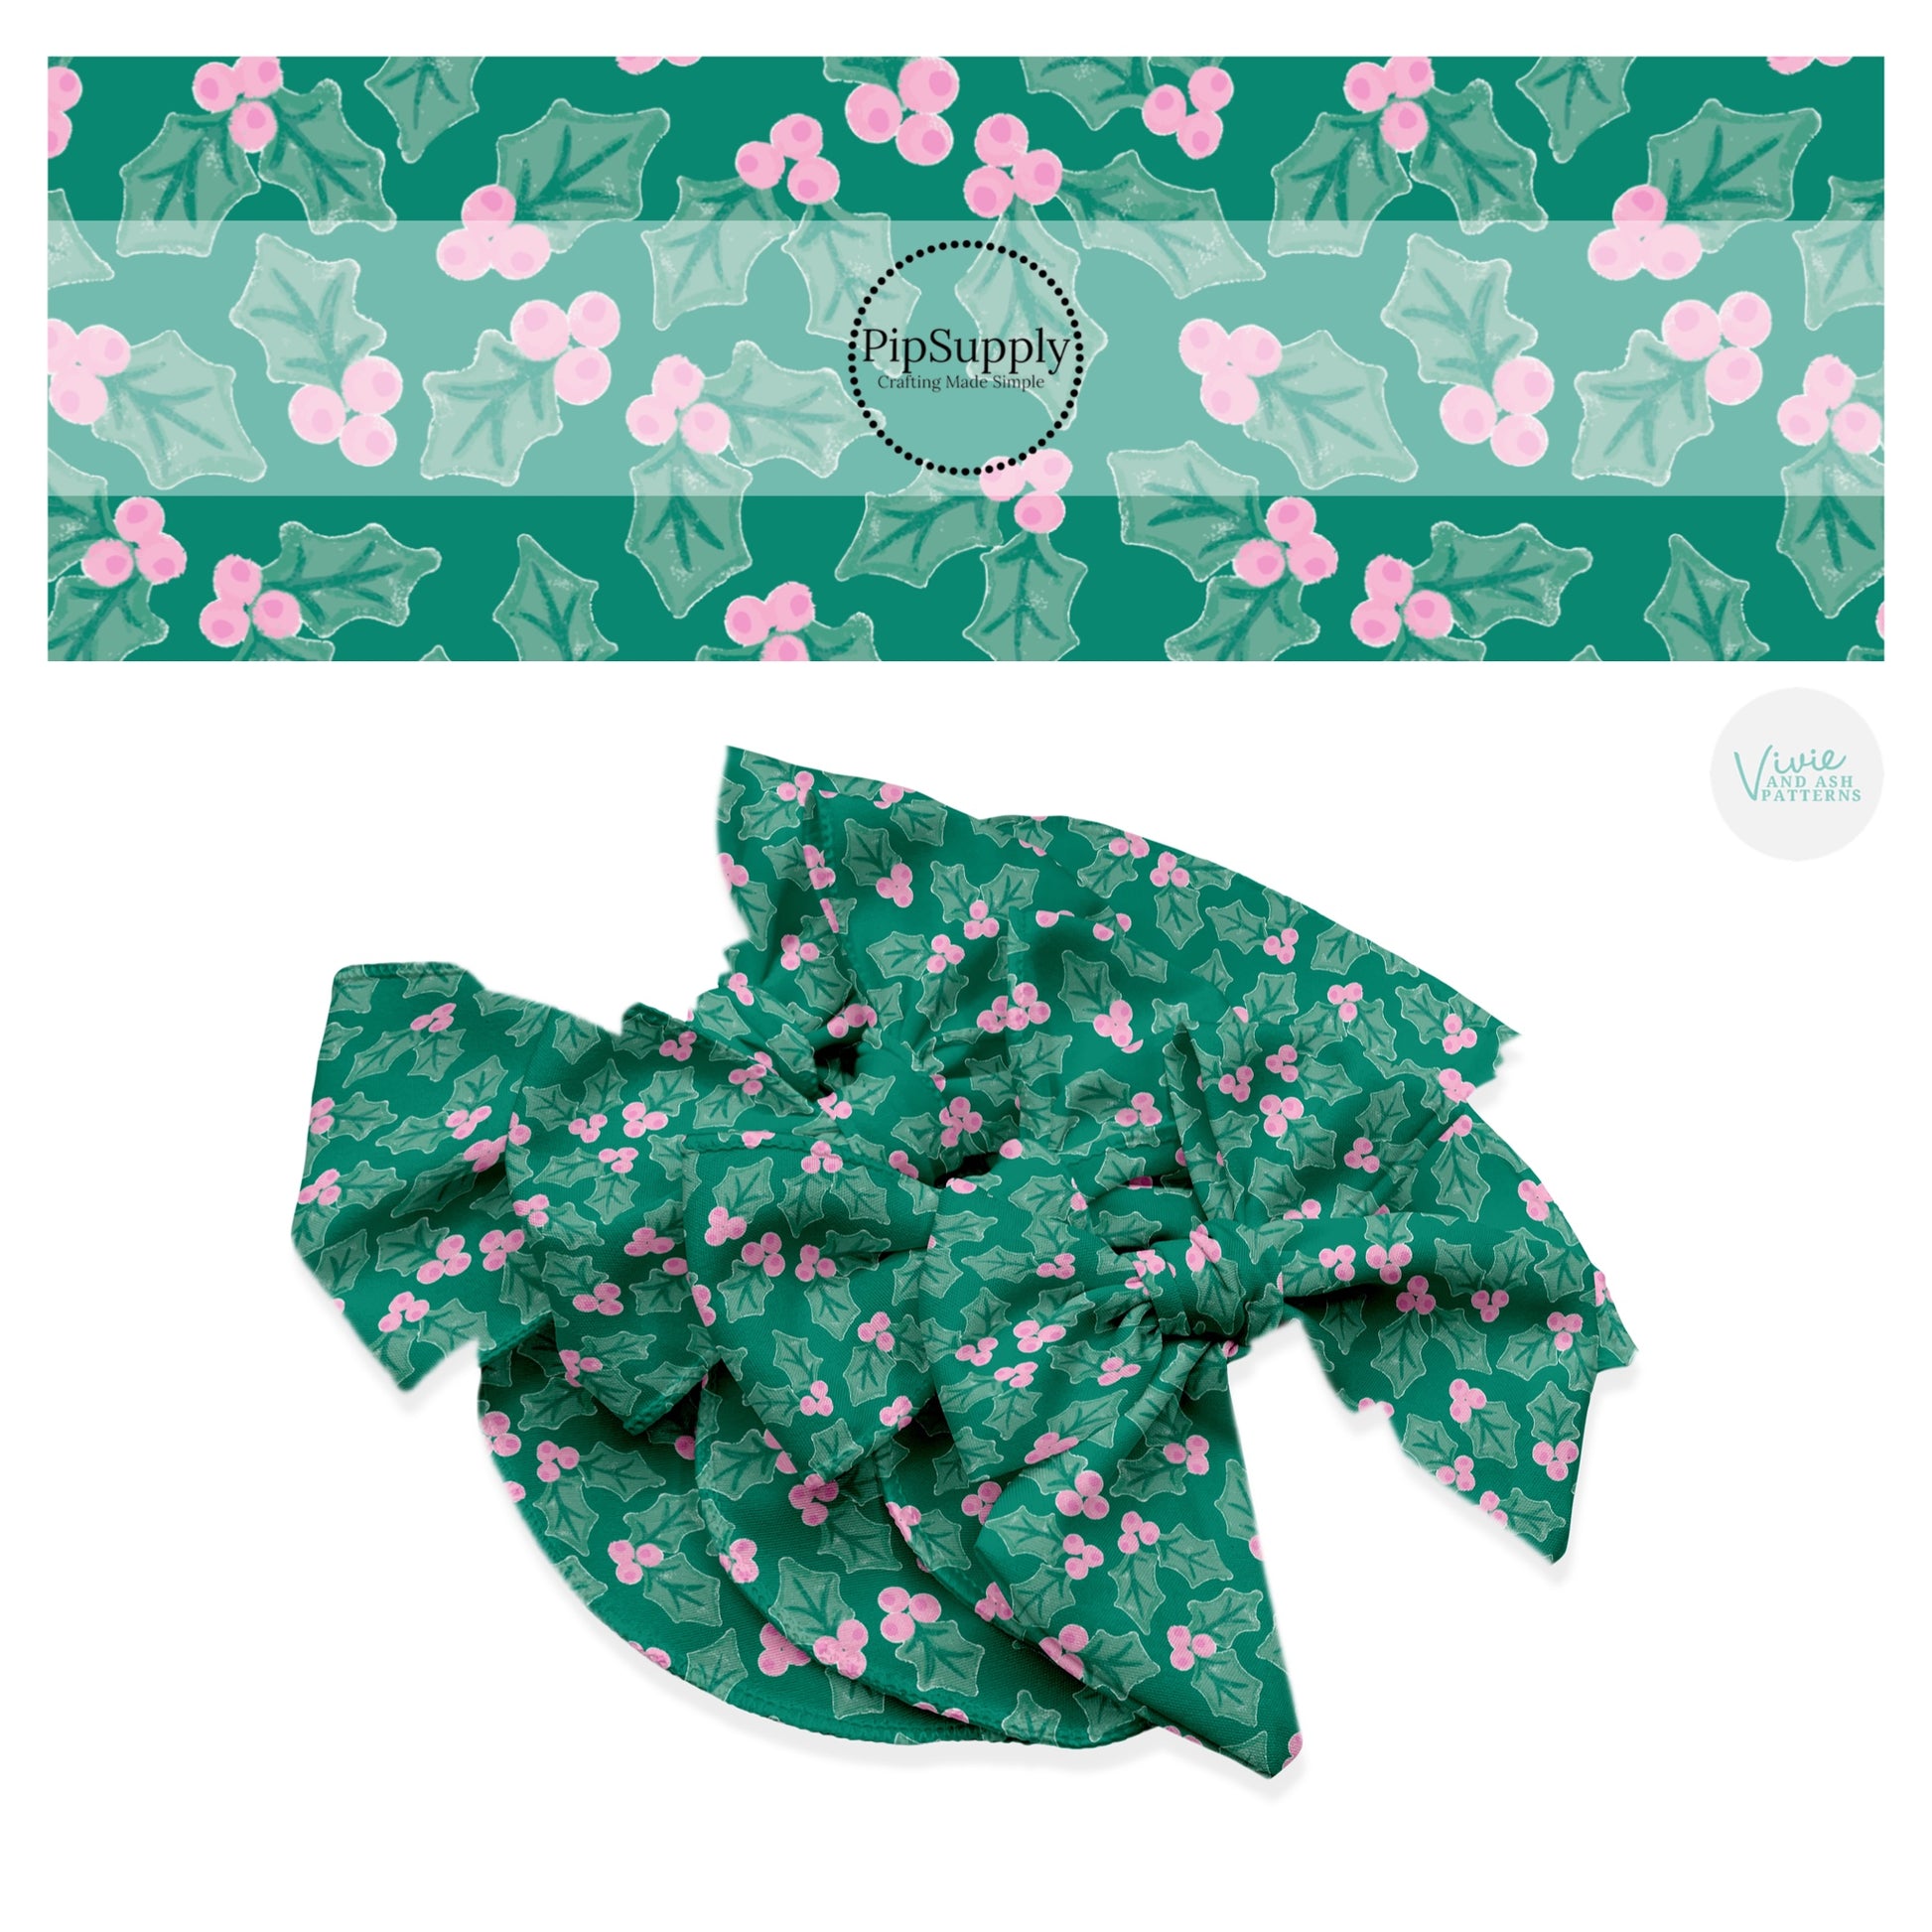 Pink berries with green holly leaves on green hair bow strips